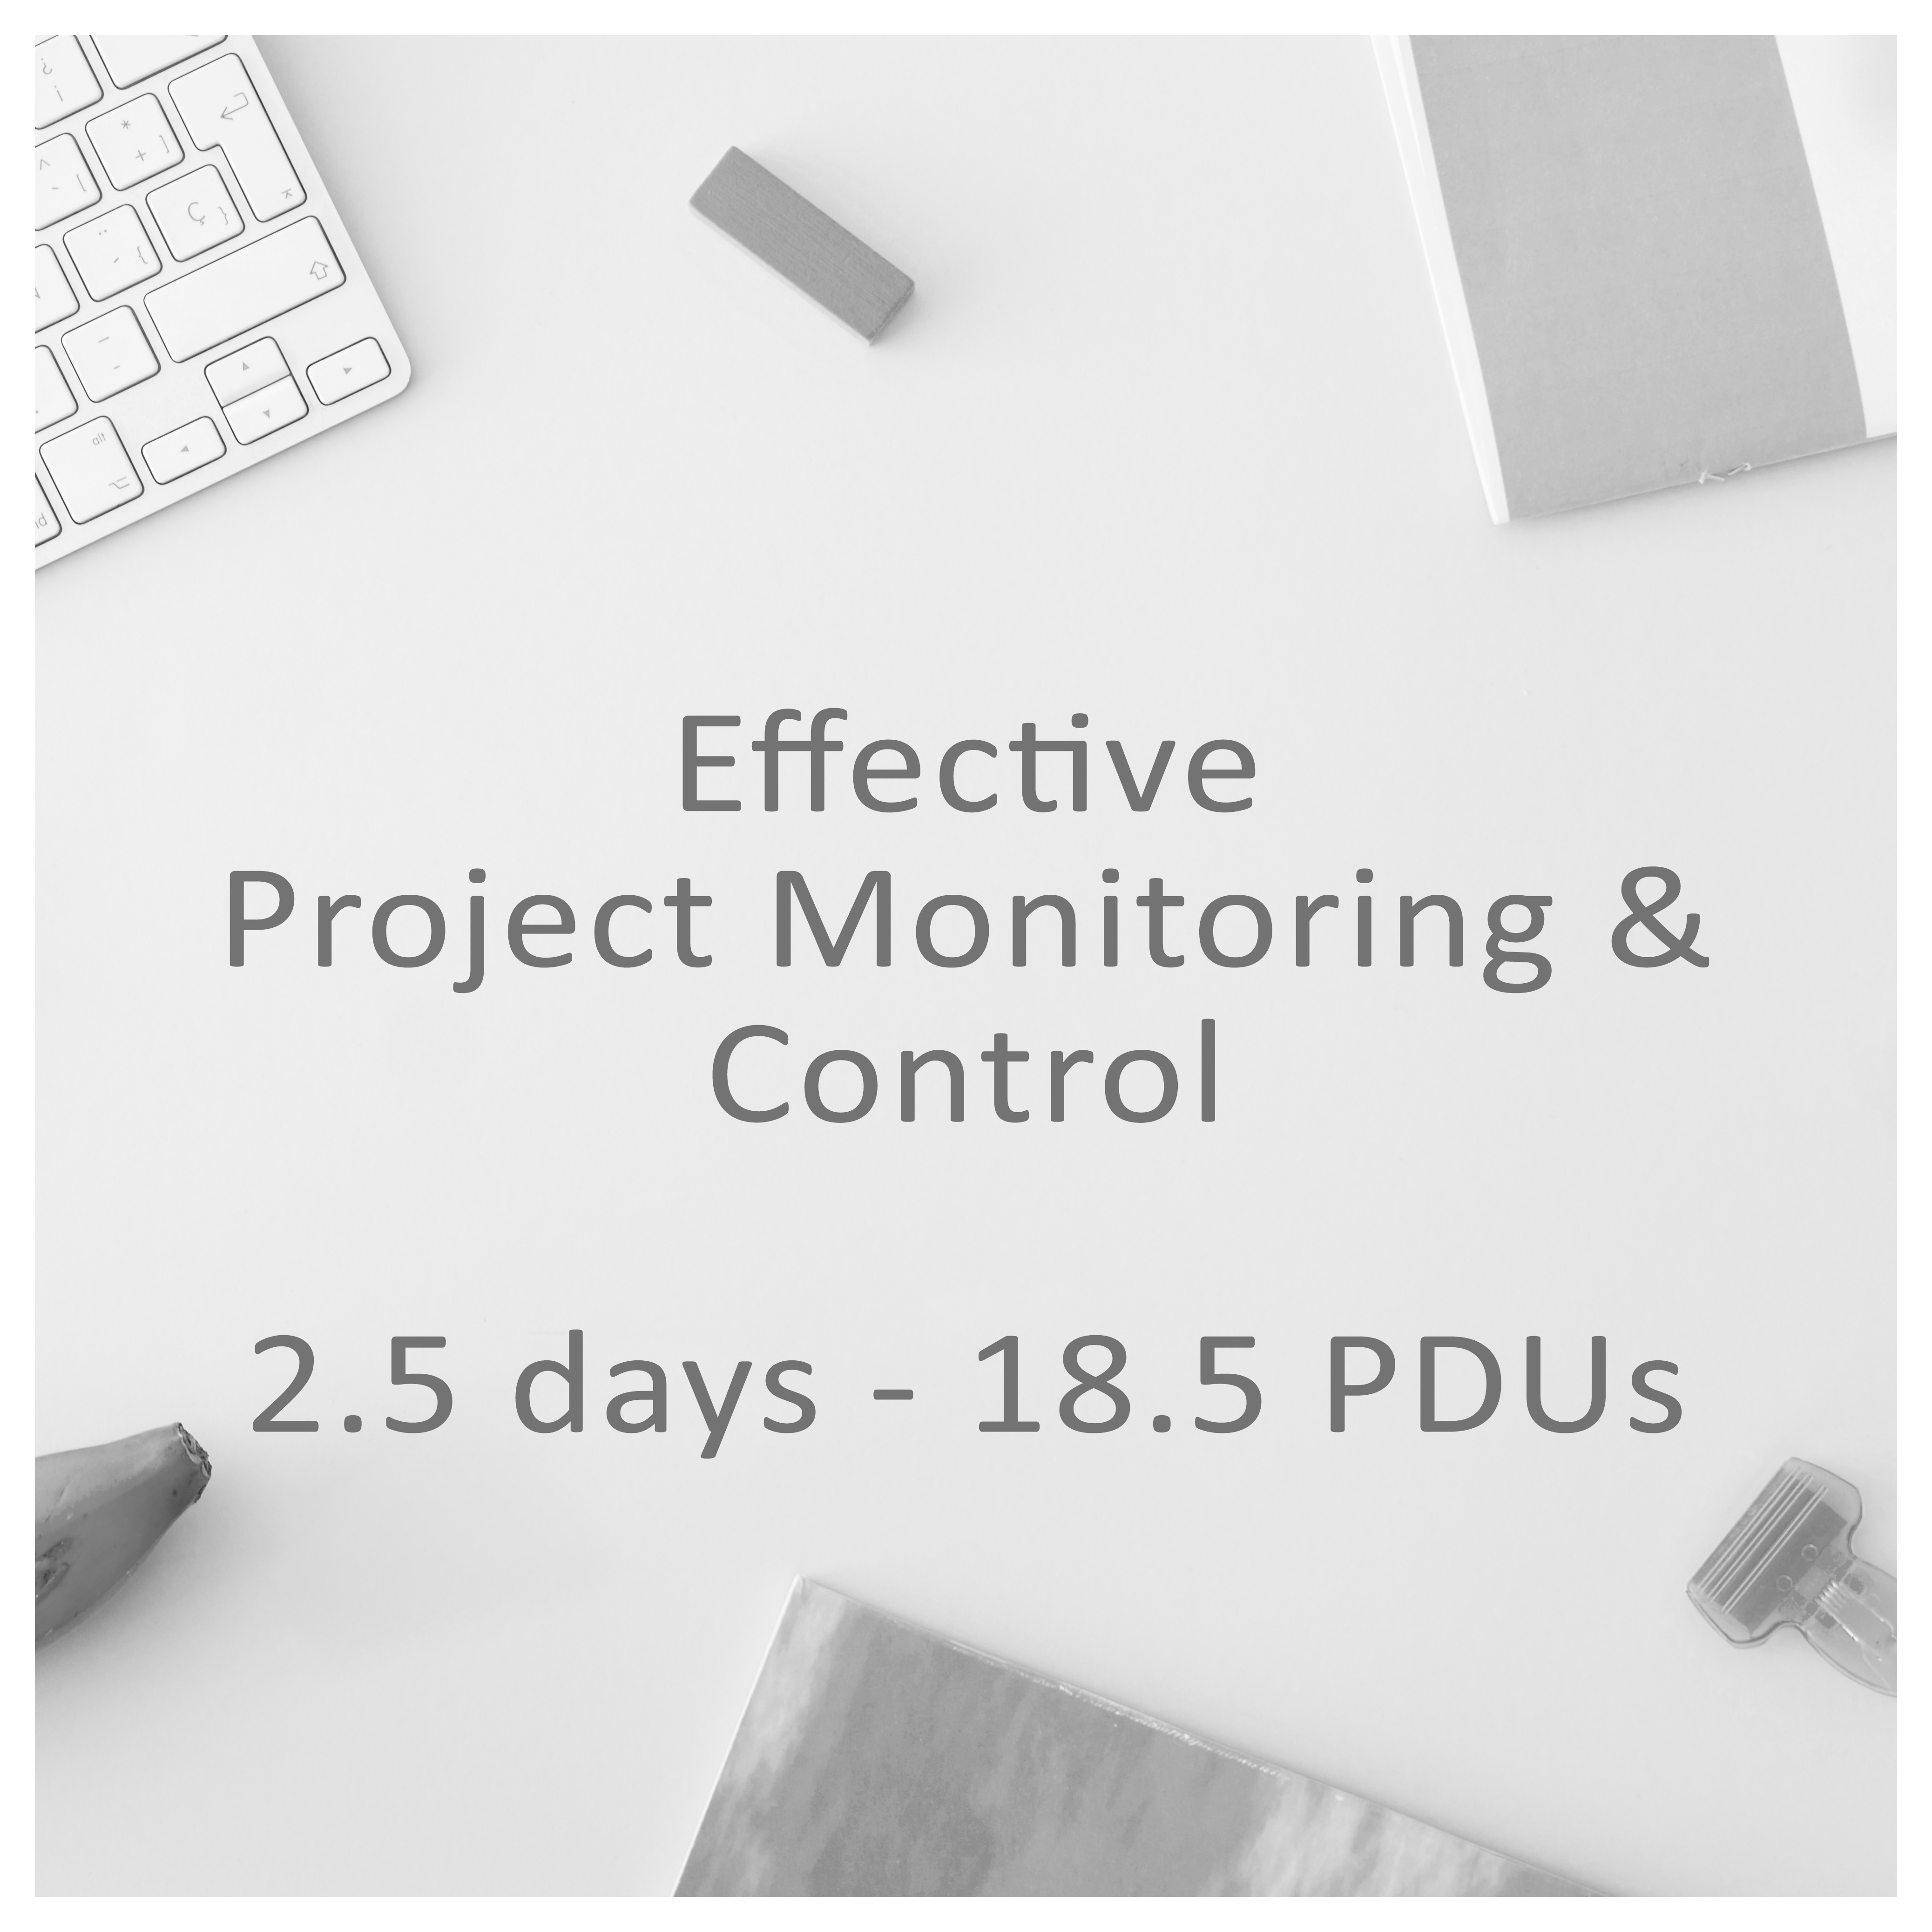 Effective Project Monitoring & Control